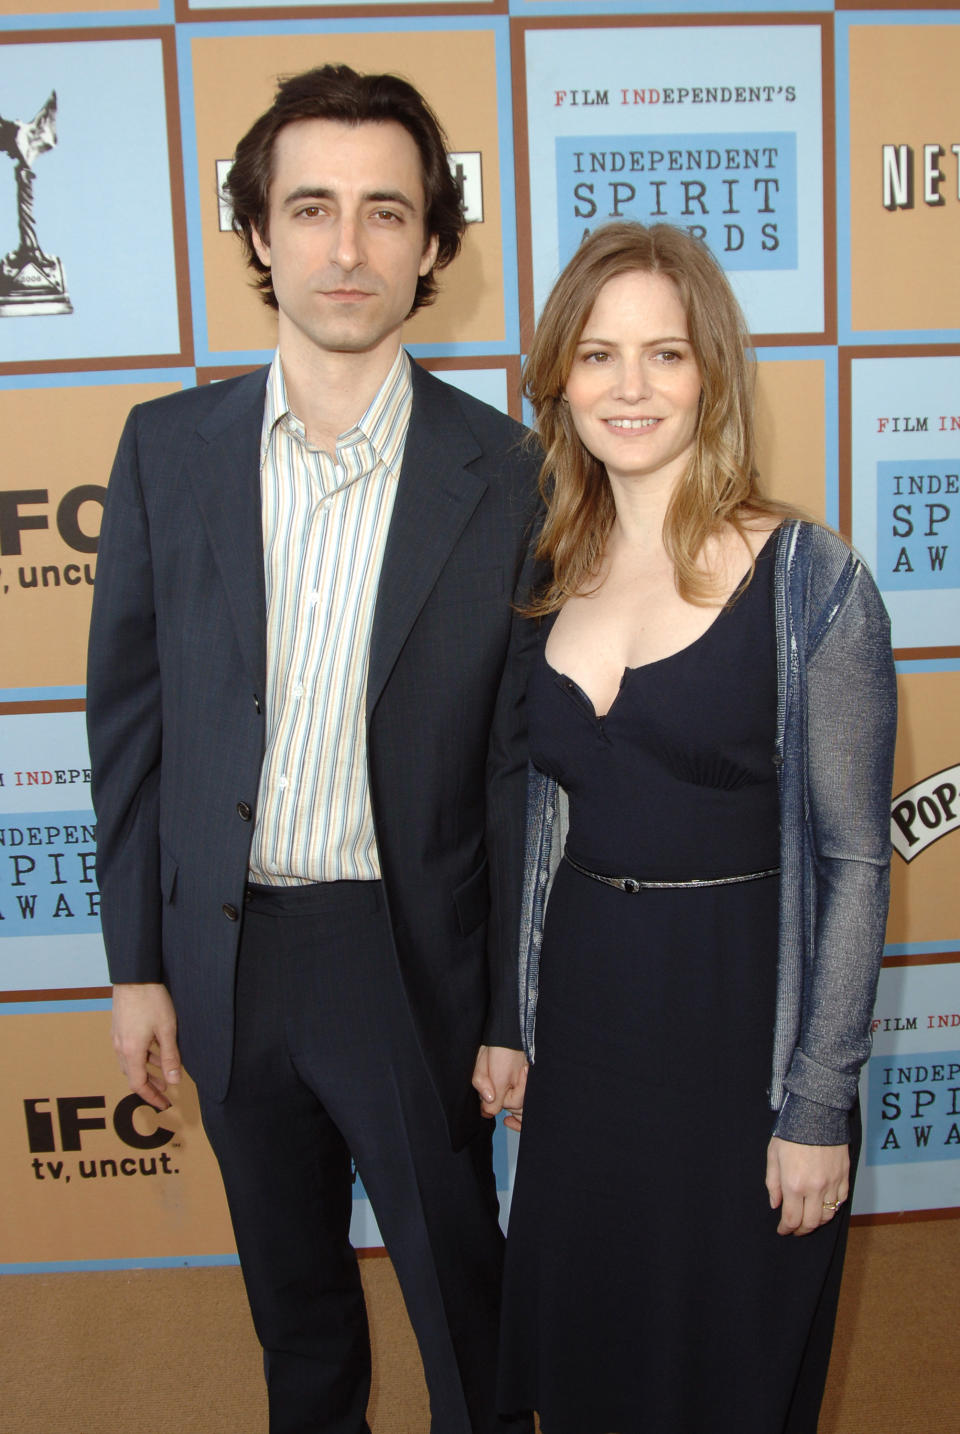 Noah Baumbach, nominee Best Screenplay and Best Director for "The Squid and the Whale," and Jennifer Jason Leigh (Photo by George Pimentel/WireImage)